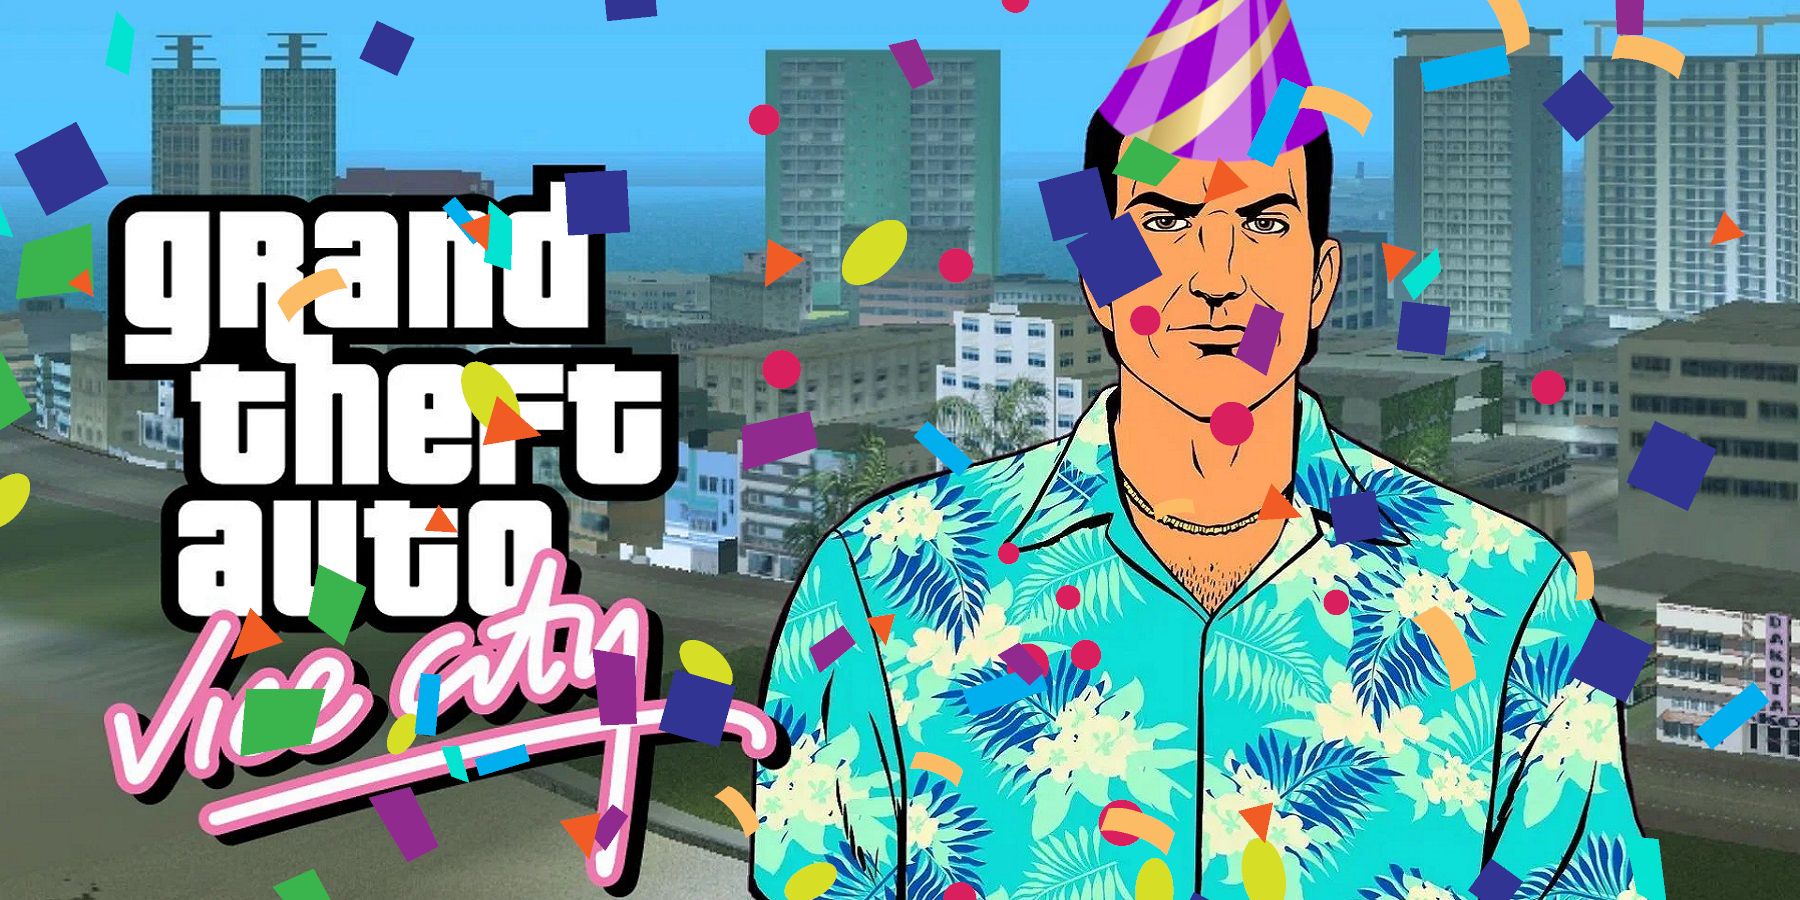 Image from GTA: Vice City showing Tommy wearing a party hat with paryt confetti falling all around him.